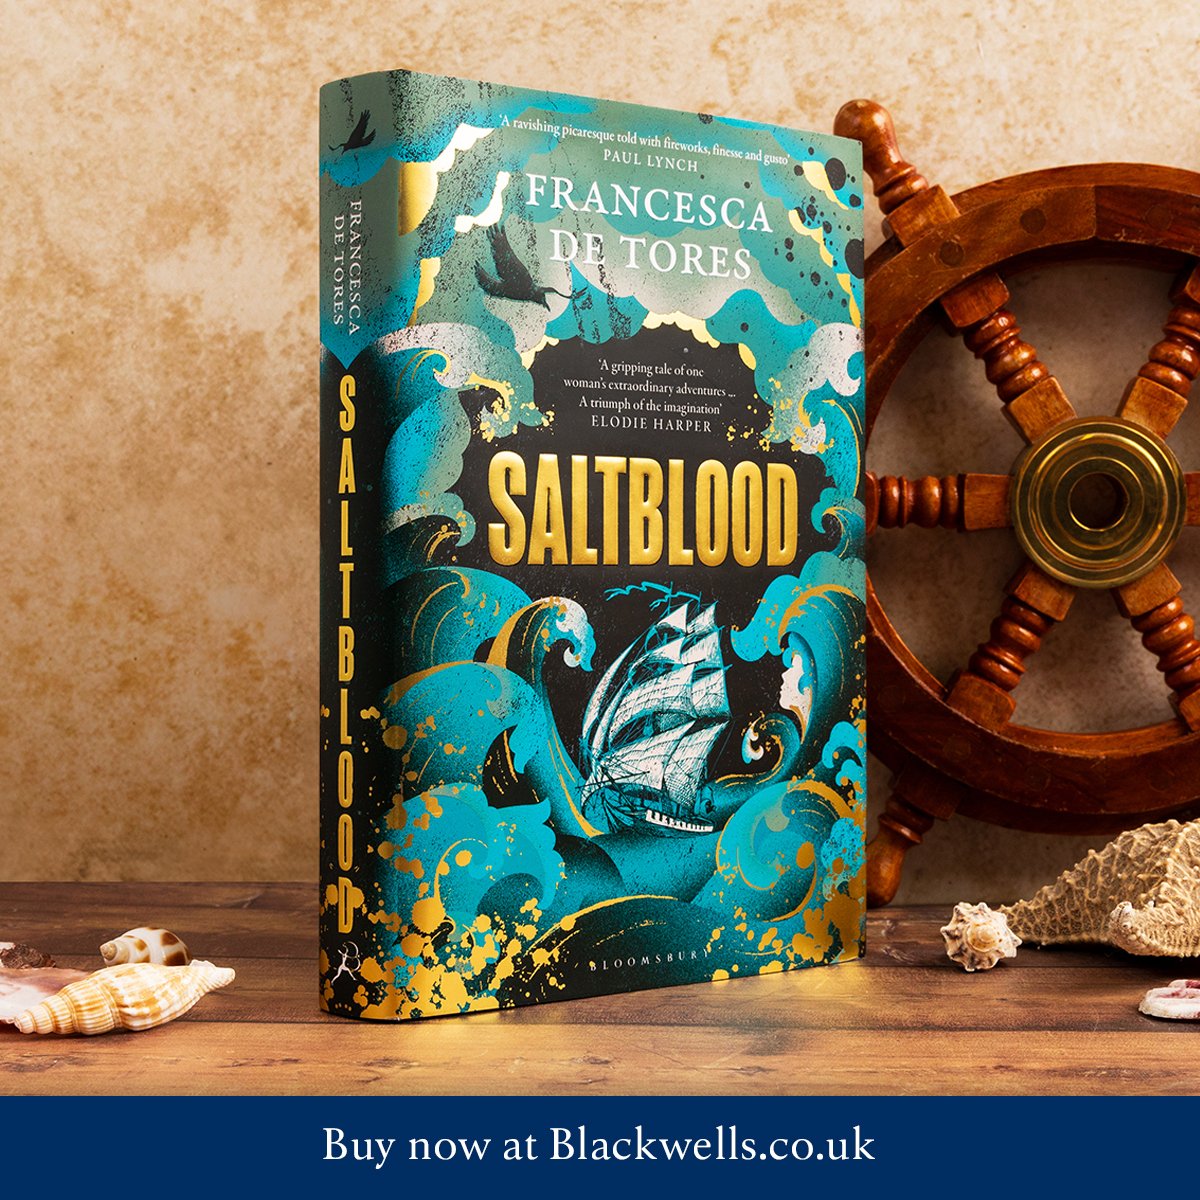 An epic literary historical novel set during the Golden Age of Piracy, about the life of the infamous female pirate Mary Read. blackwells.co.uk/bookshop/produ…